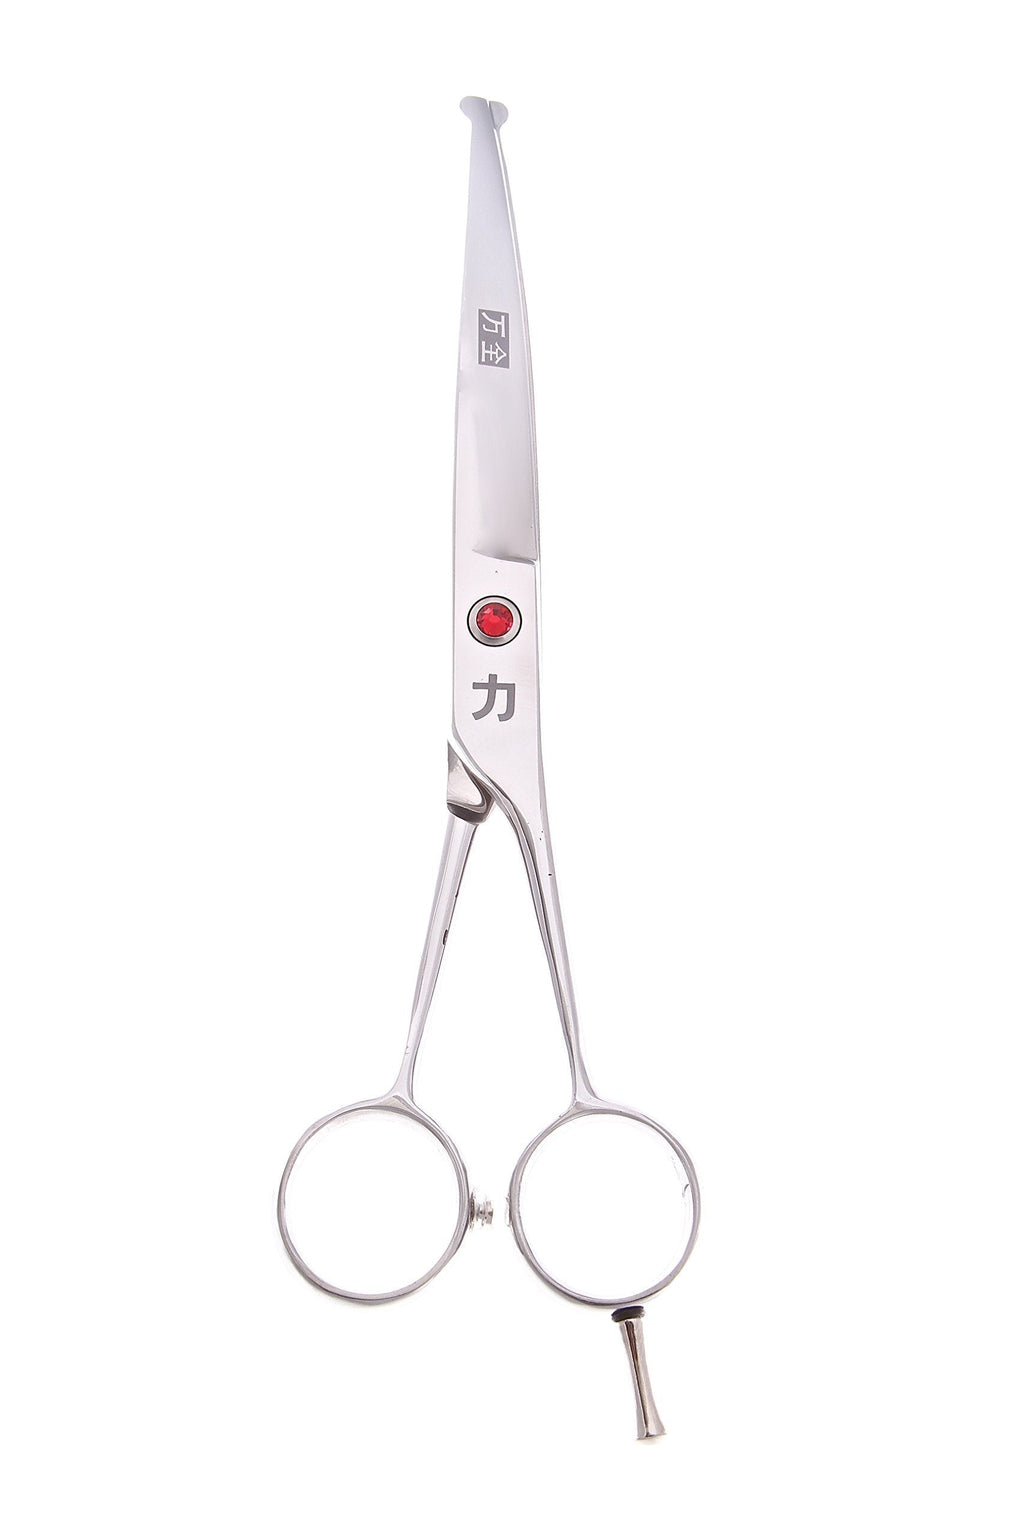 [Australia] - ShearsDirect Japanese 440C Stainless Steel Curved Ball-Tip Cutting Shear with Opposing Handles, 6.5" 